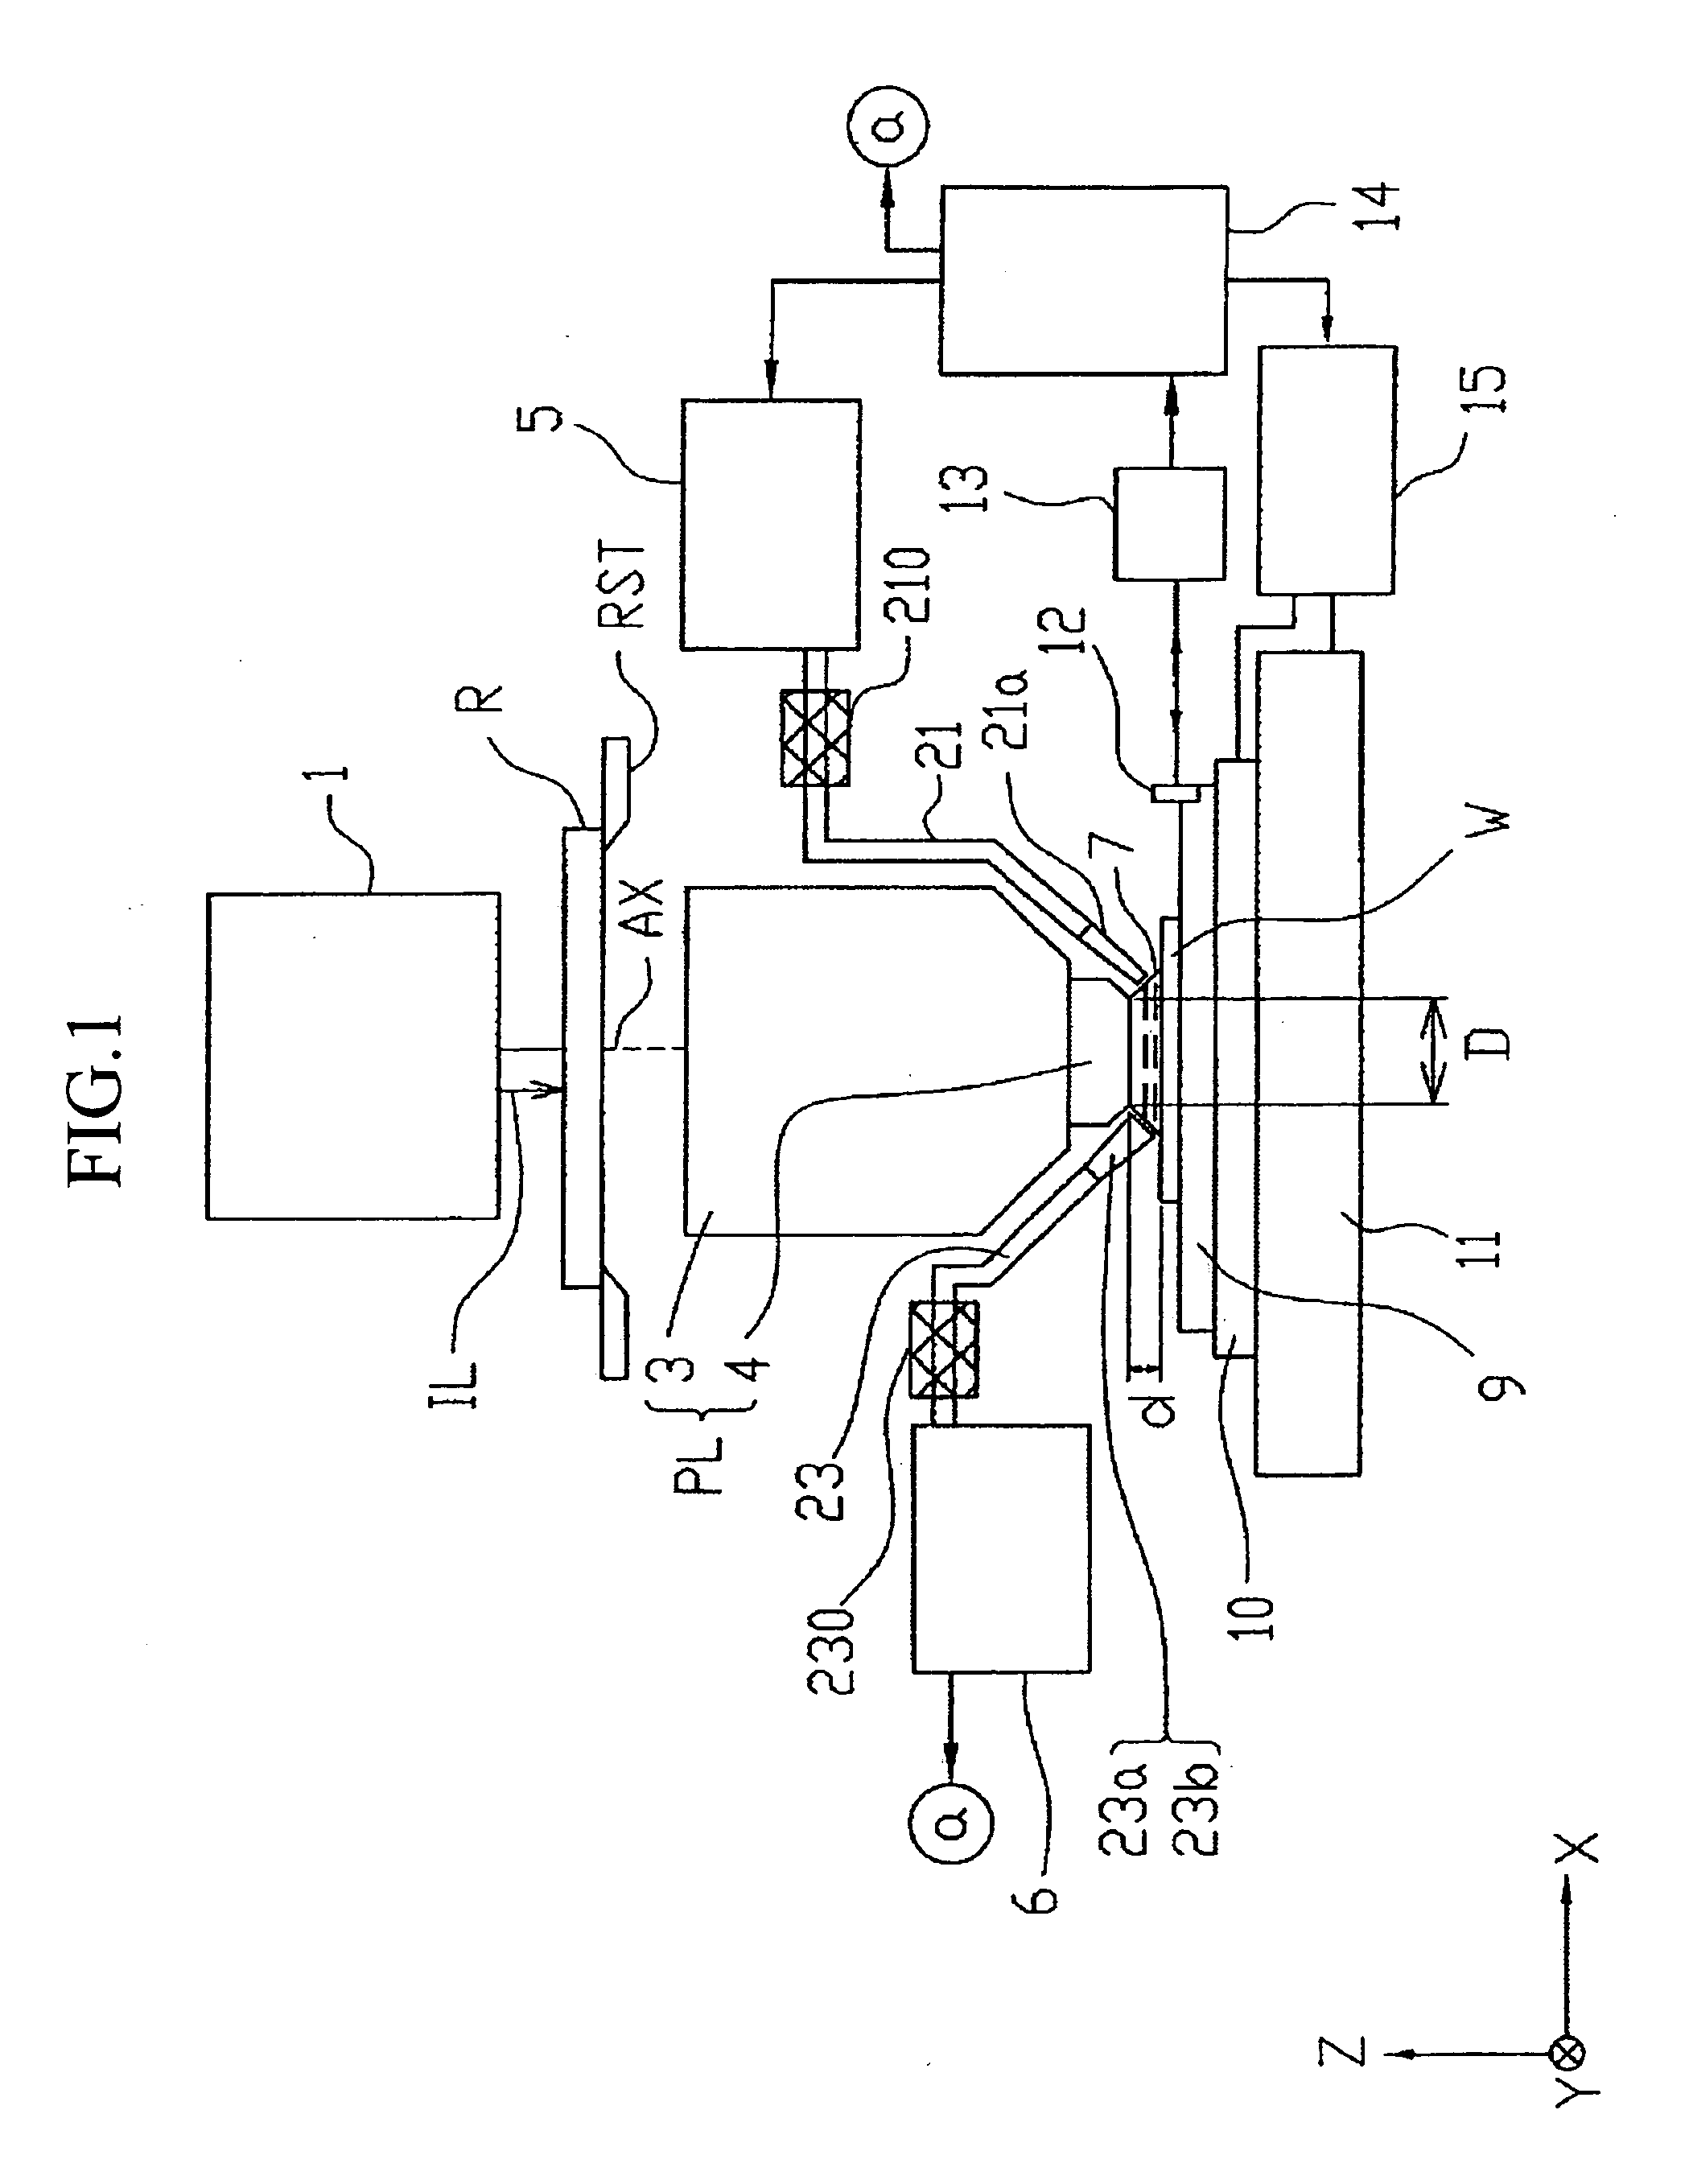 Projection exposure apparatus, cleaning and maintenance methods of a projection exposure apparatus, and device manufacturing method